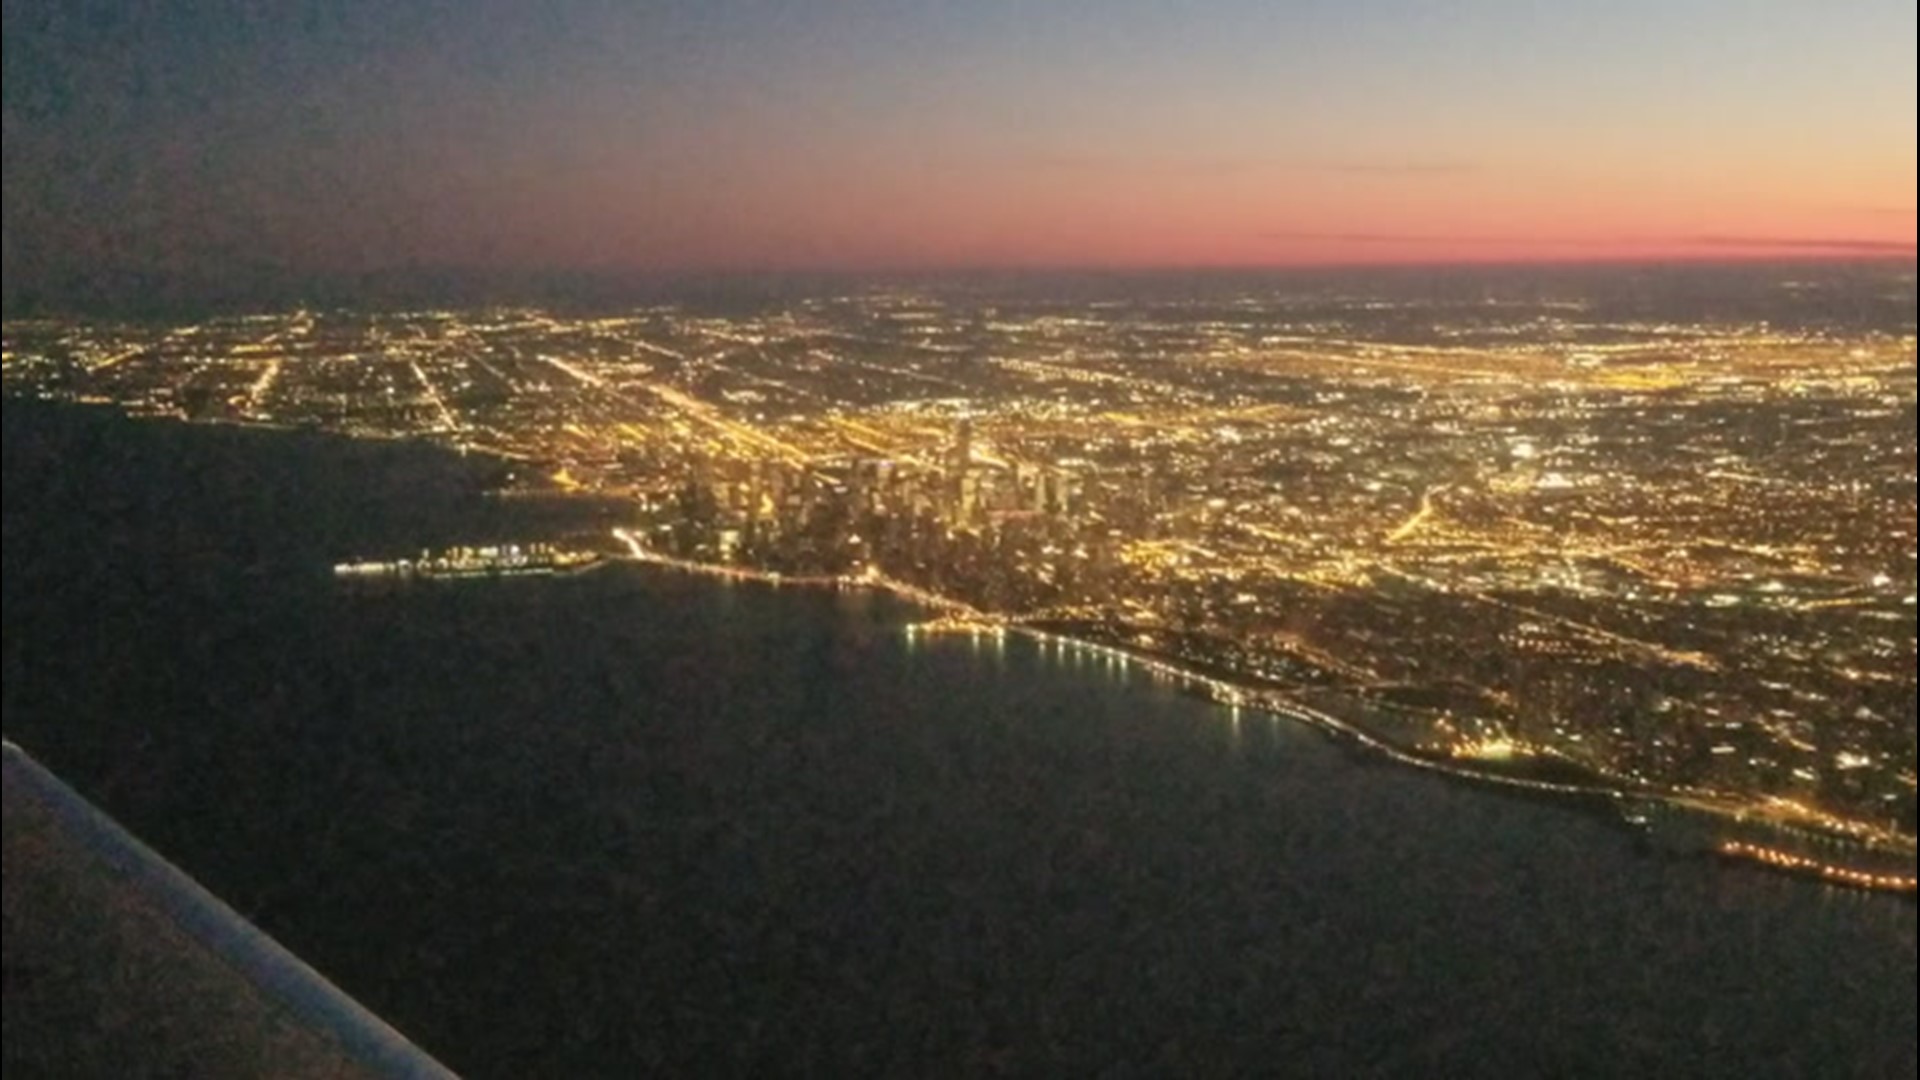 AccuWeather's Marvin Gomez caught this footage of a sunset as his flight entered the city of Chicago, Illinois, on Feb. 18.